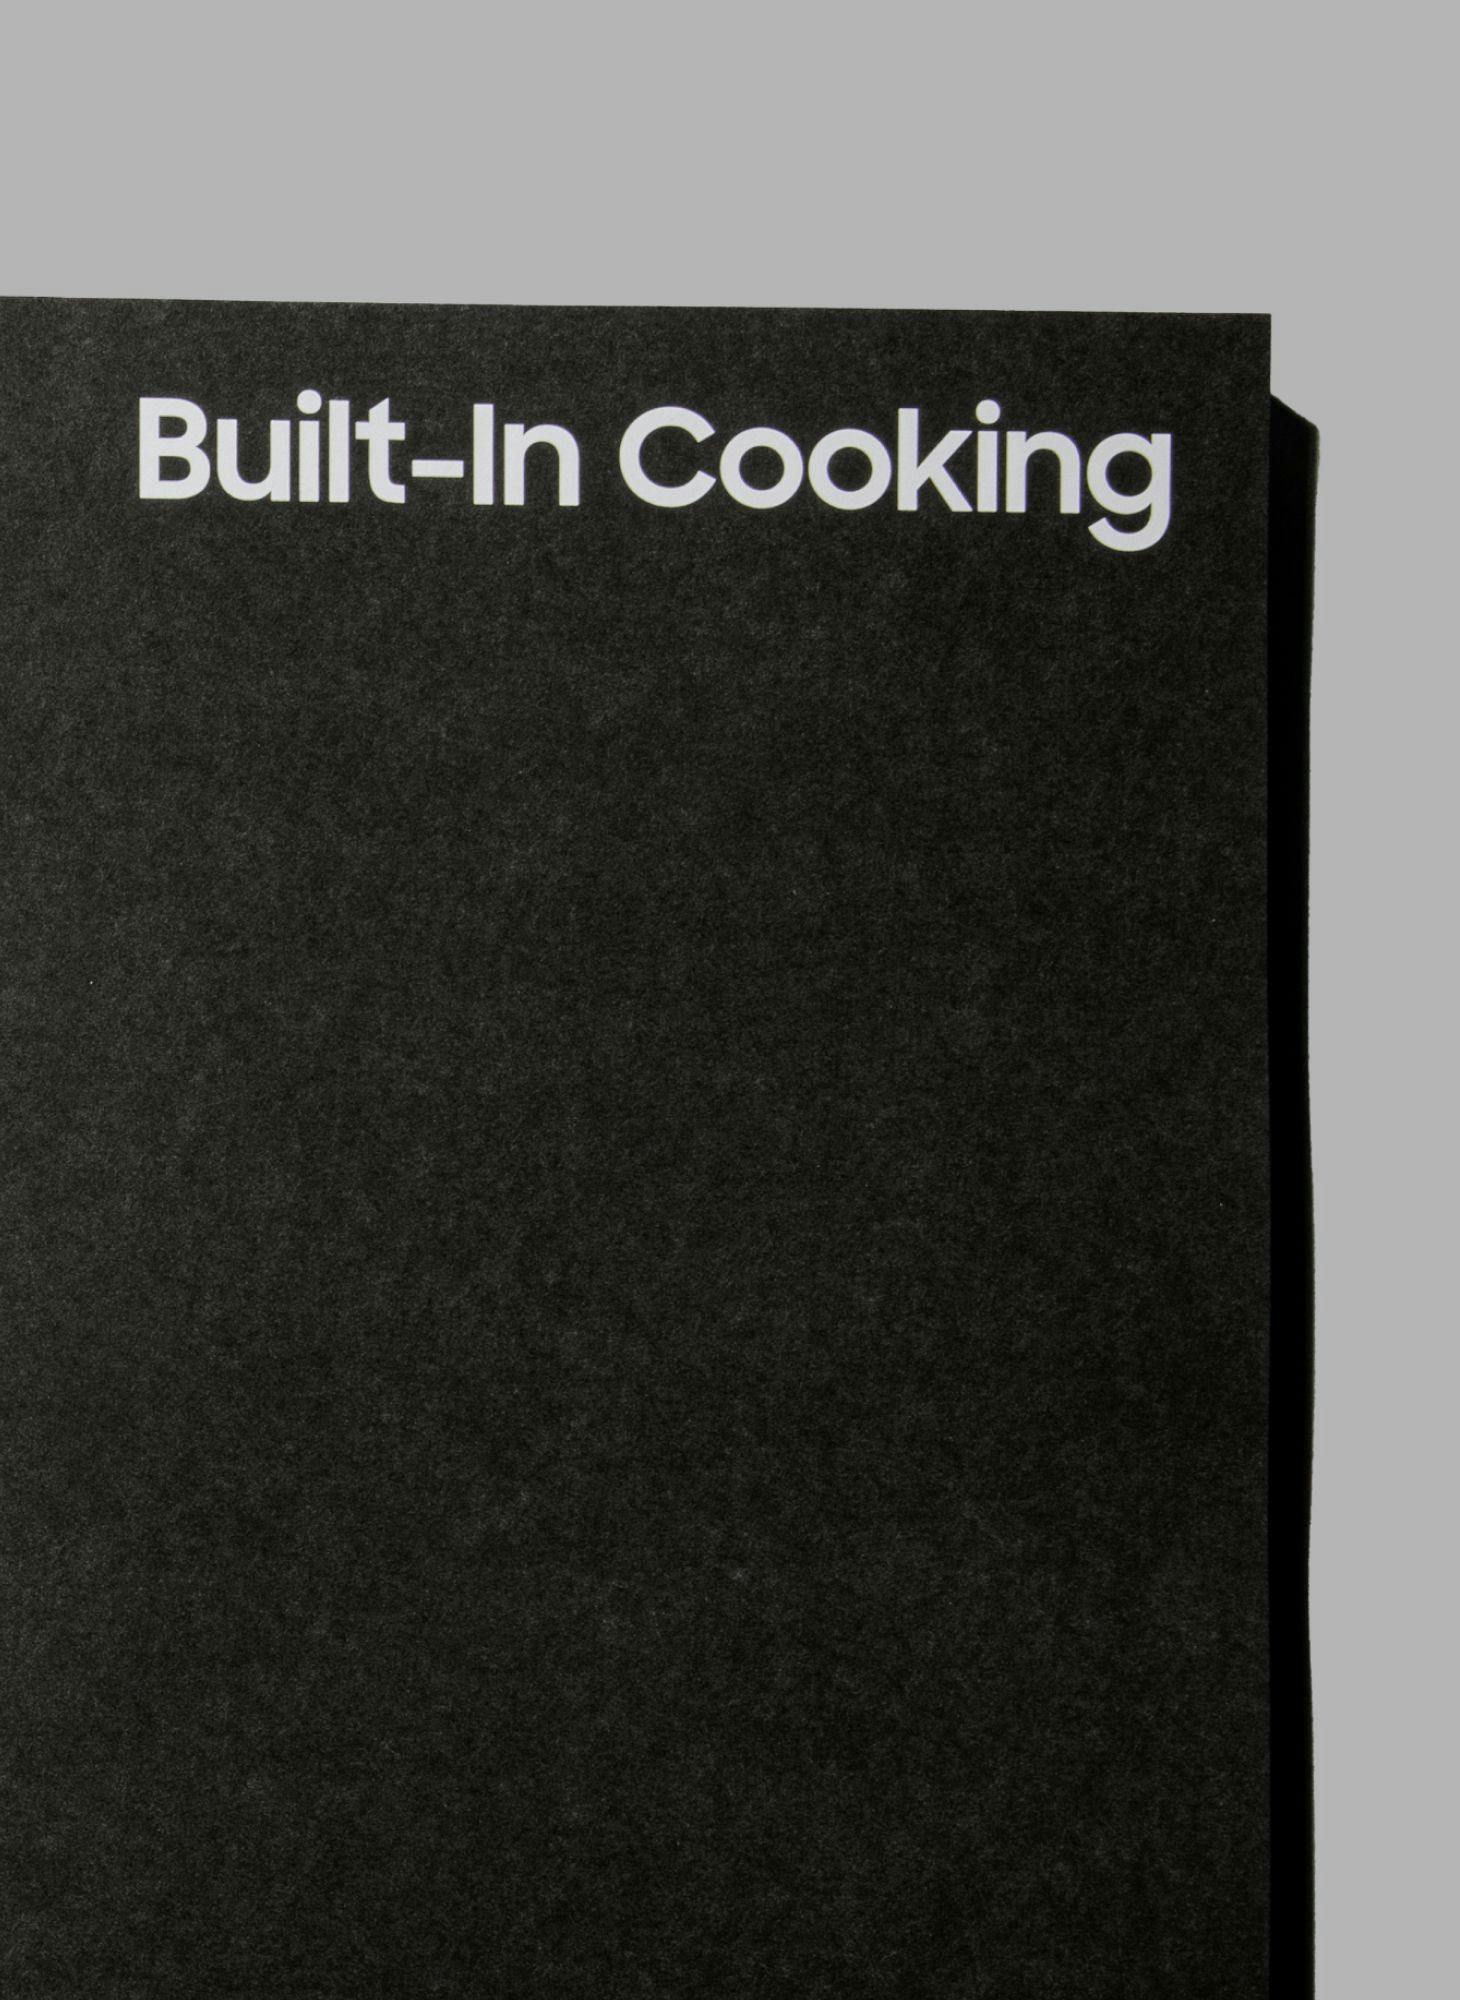 Section of Samsung Builder's Catalog About Built-in Cooking